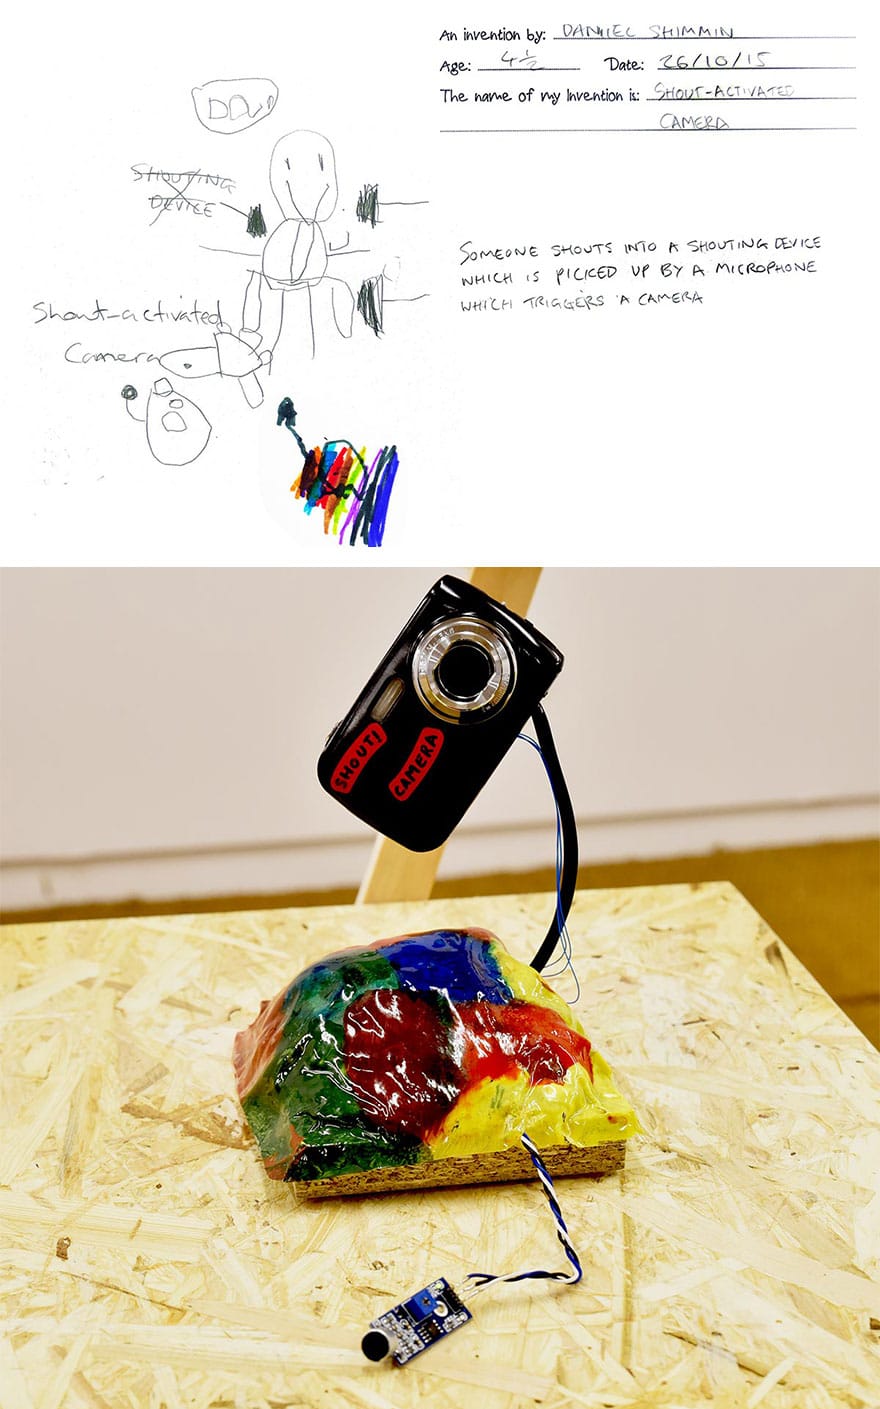 kids-inventions-turned-into-reality-inventors-project-dominic-wilcox-79__880